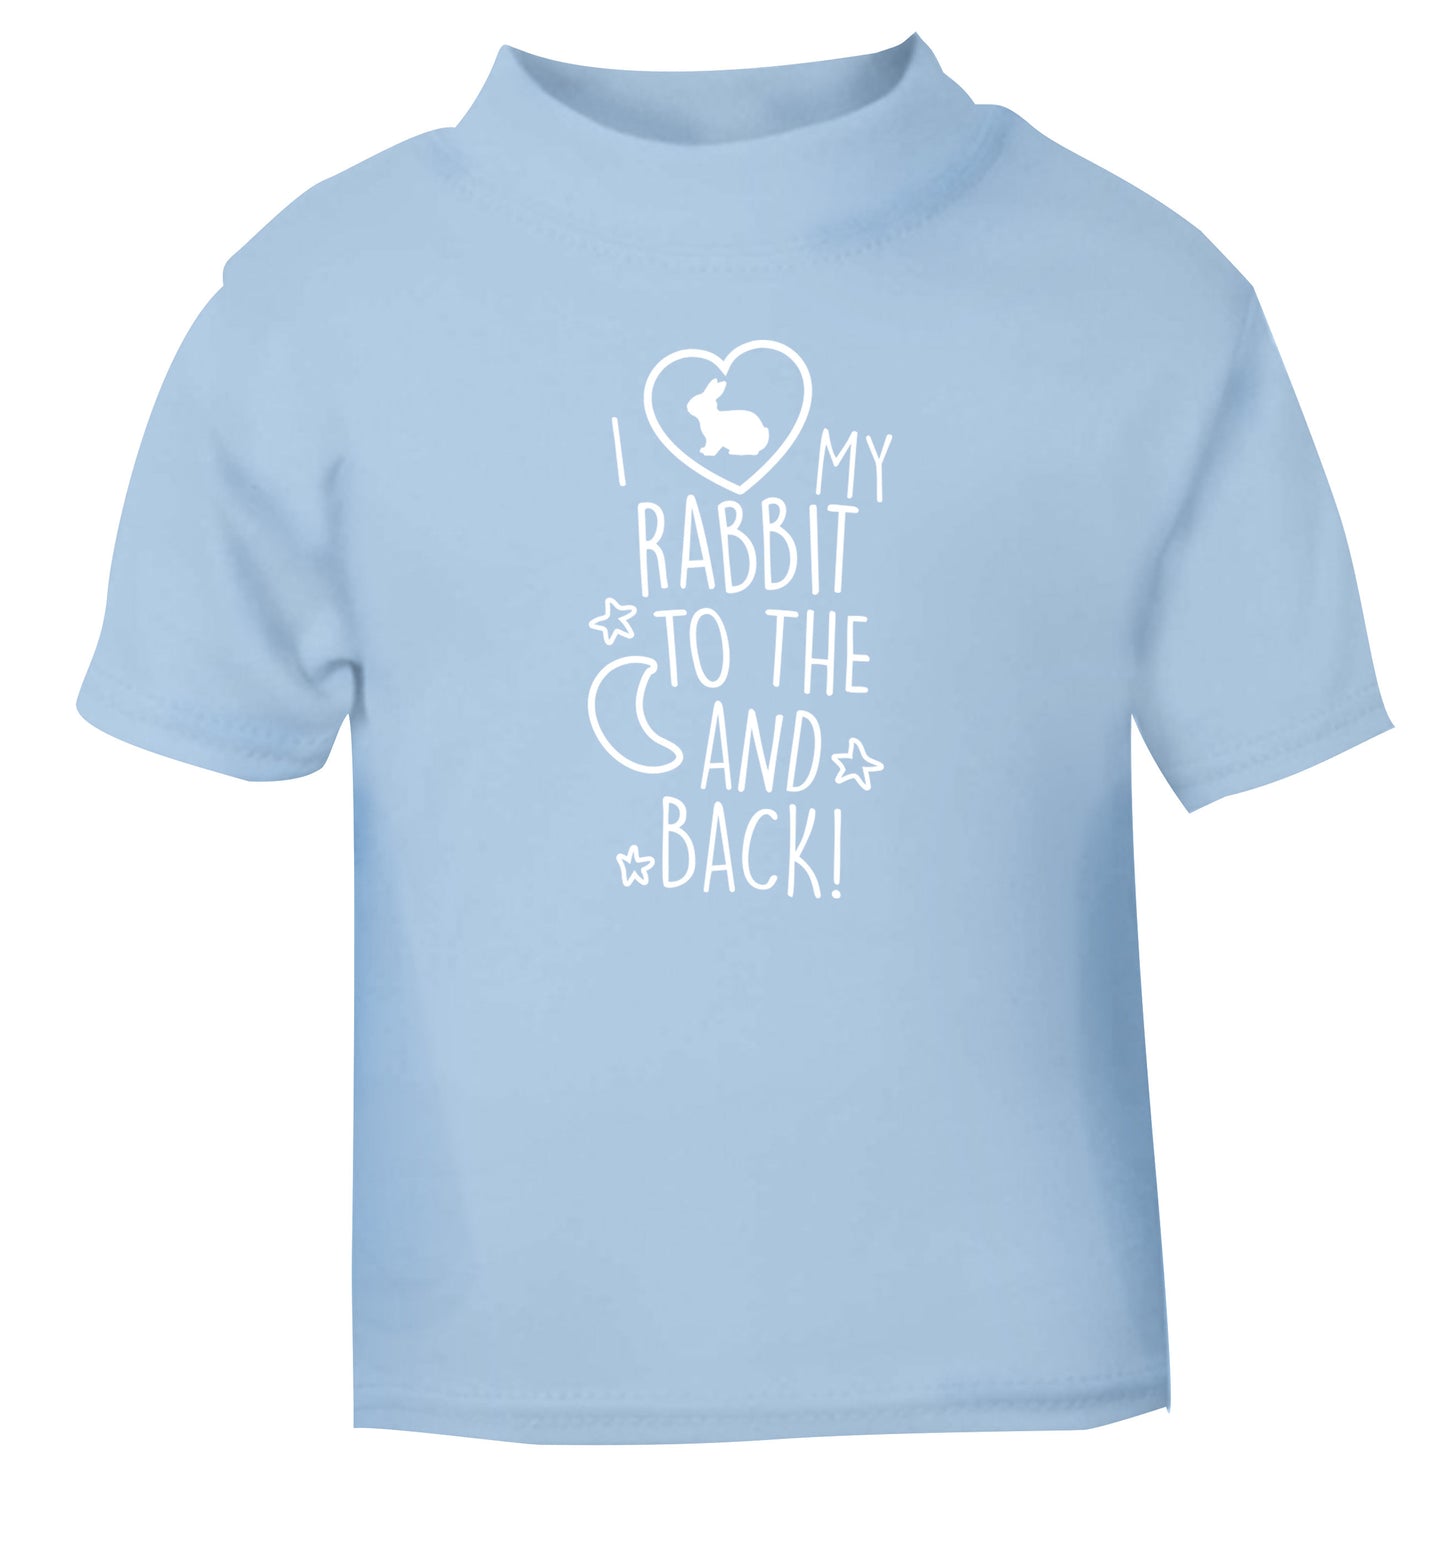 I love my rabbit to the moon and back light blue Baby Toddler Tshirt 2 Years